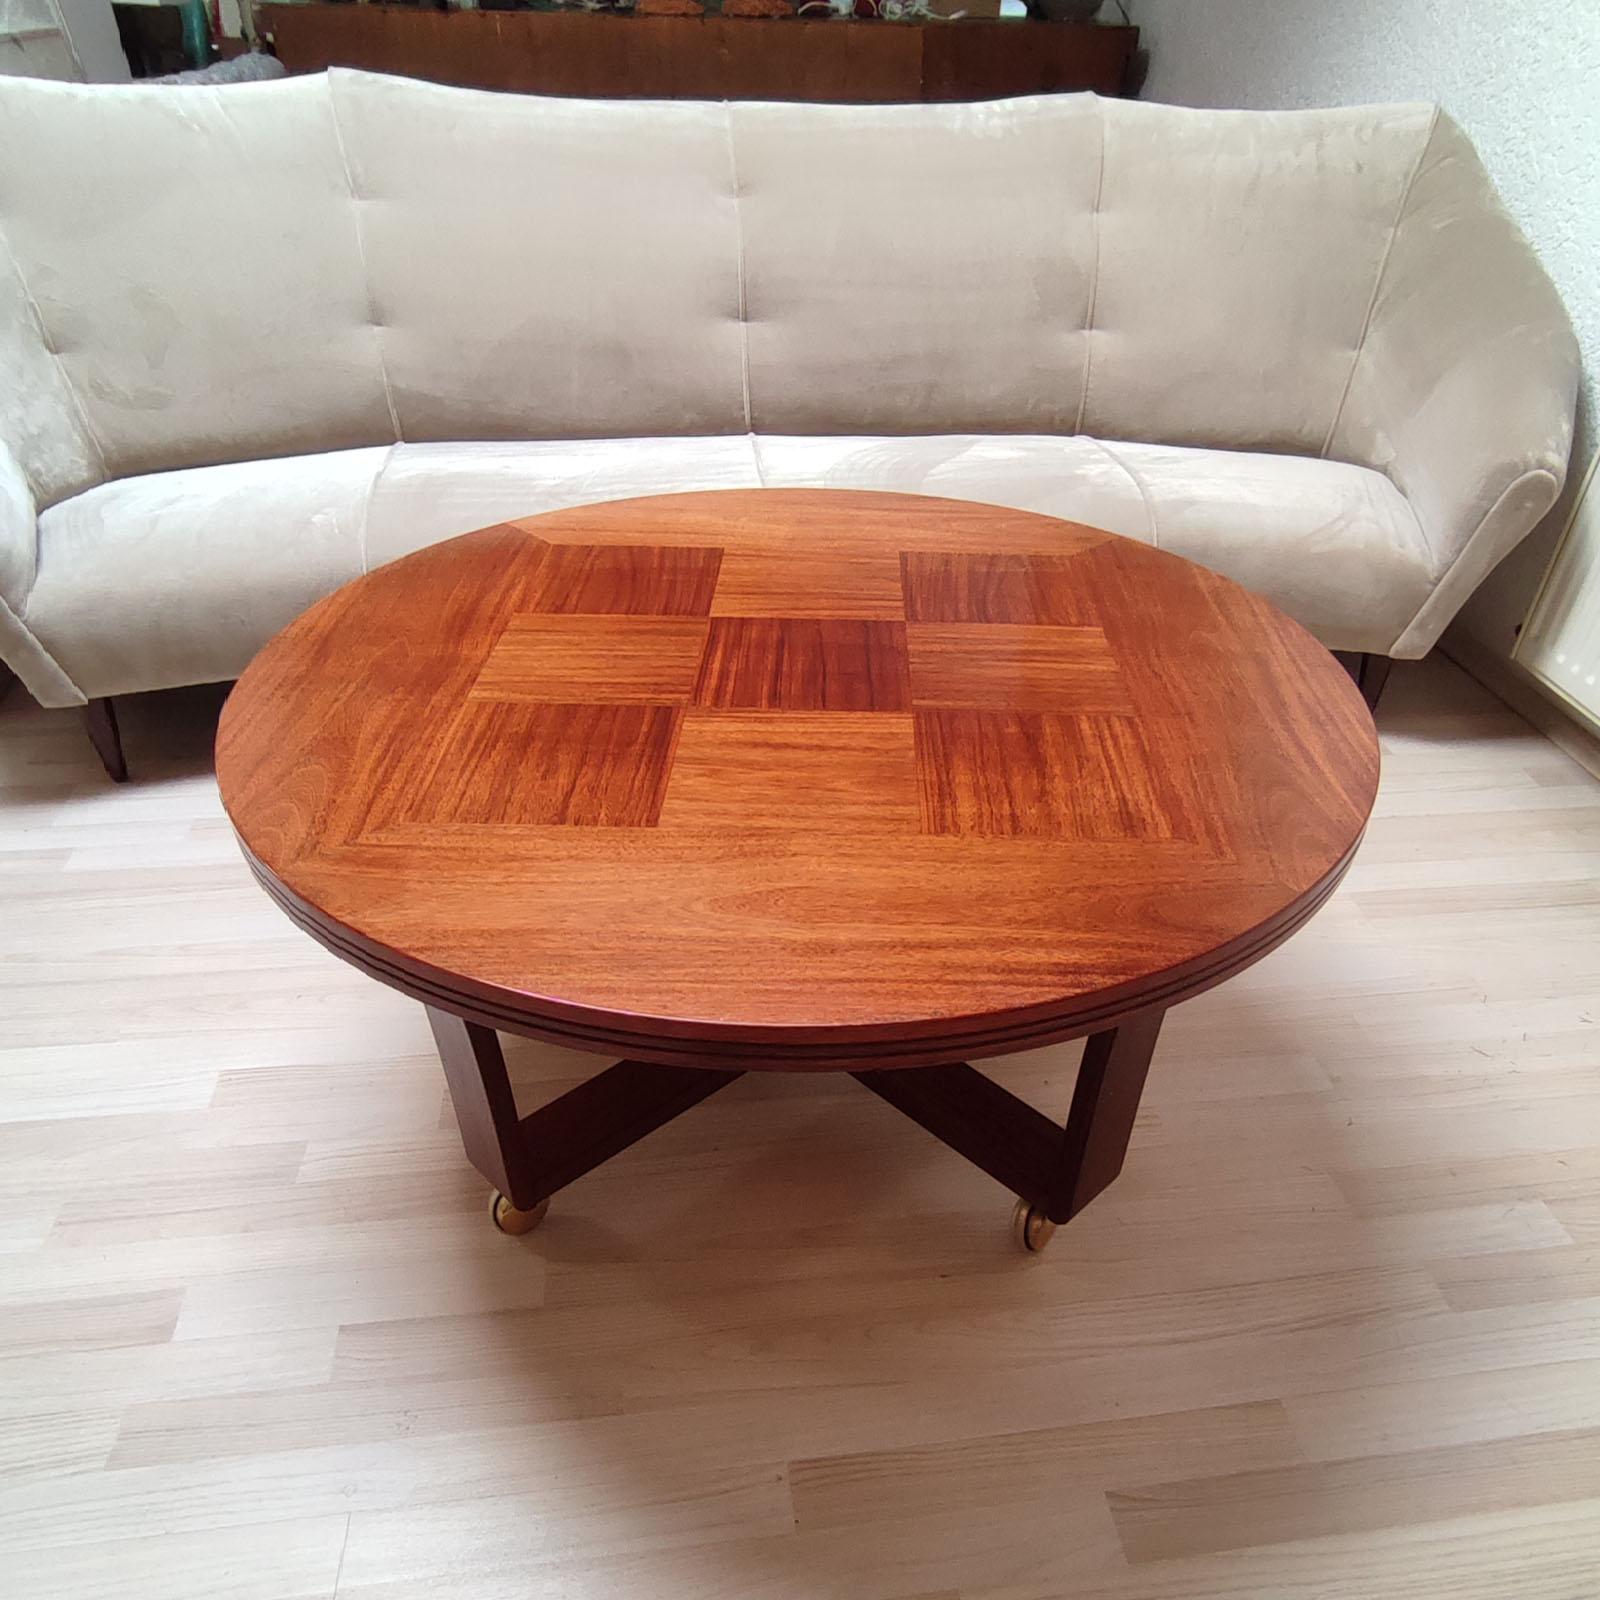 Late 20th Century Mid-Century Modern Round Coffee Sofa Table on Castors, Sweden 1970s For Sale